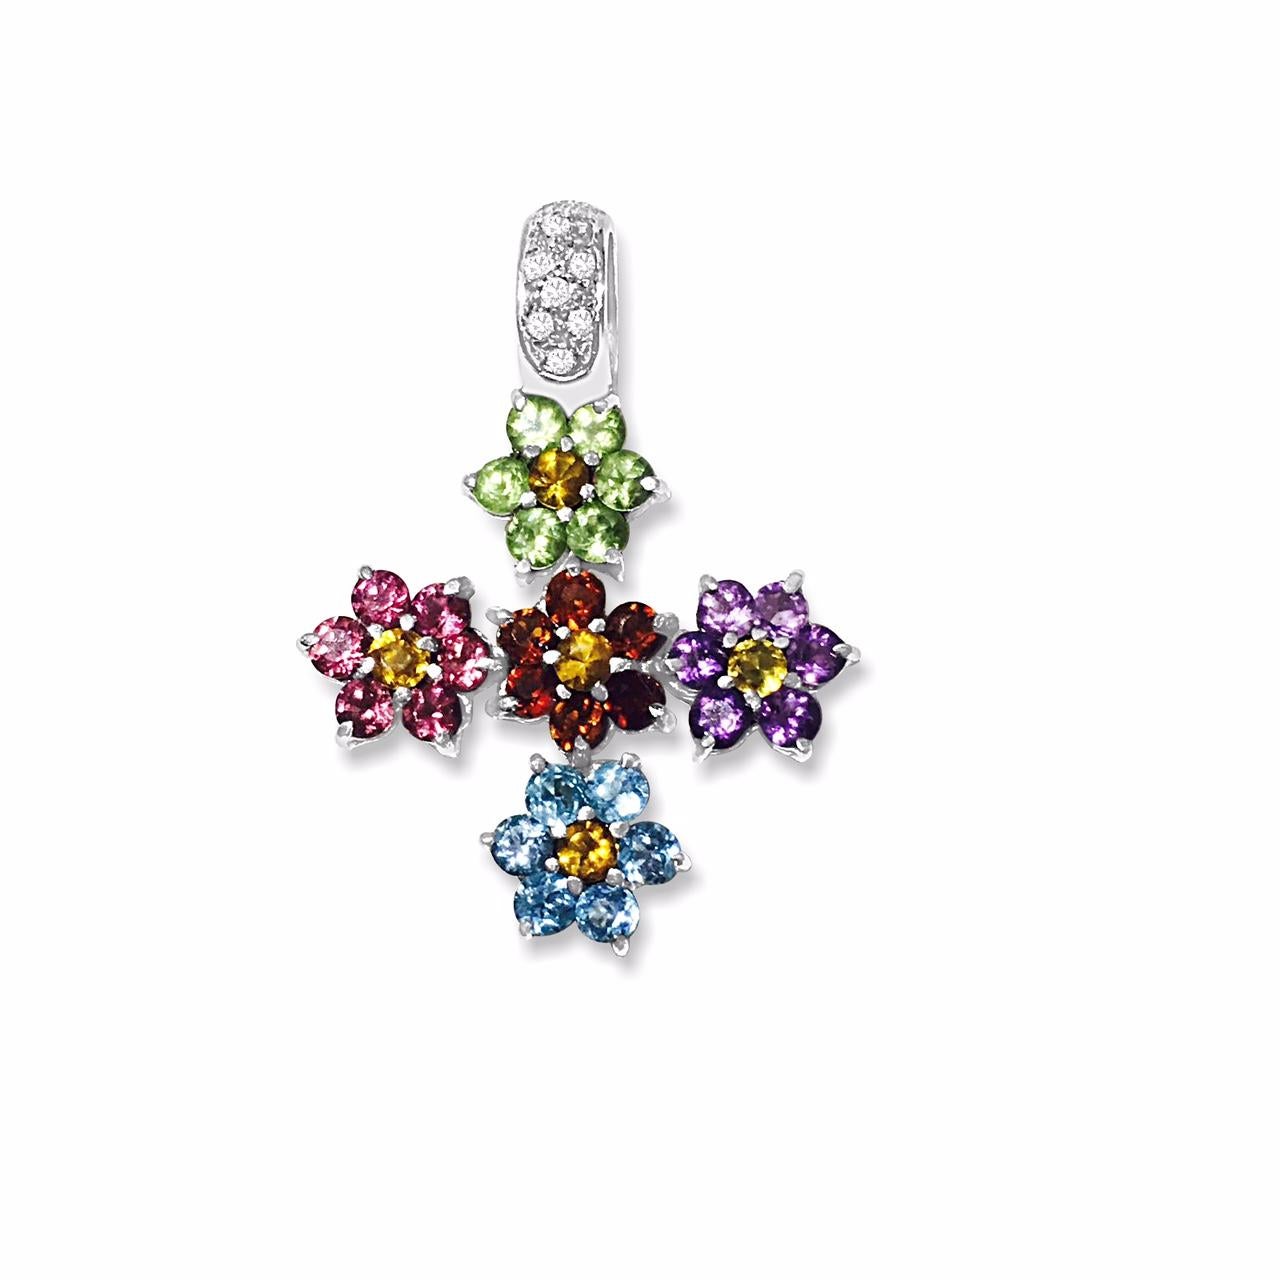 18k white gold. 1/4 carat diamonds. Rainbow color cross. Extremely gorgeous and one of a kind.